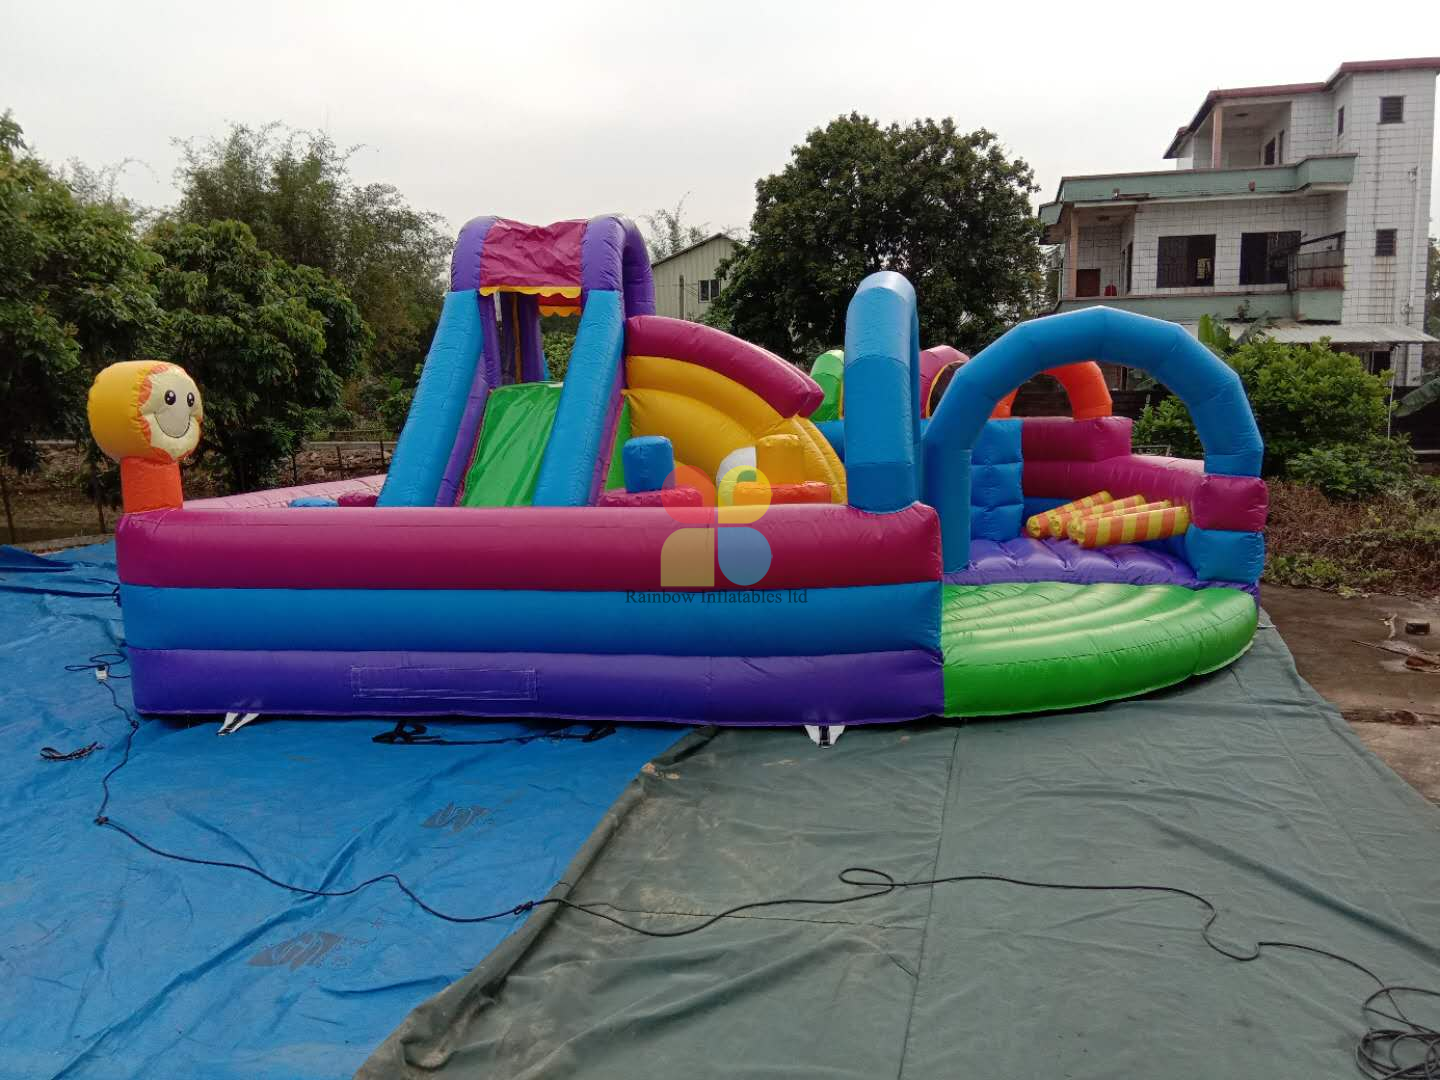 Outdoor Durable Inflatable Simple Color Playground for Sale